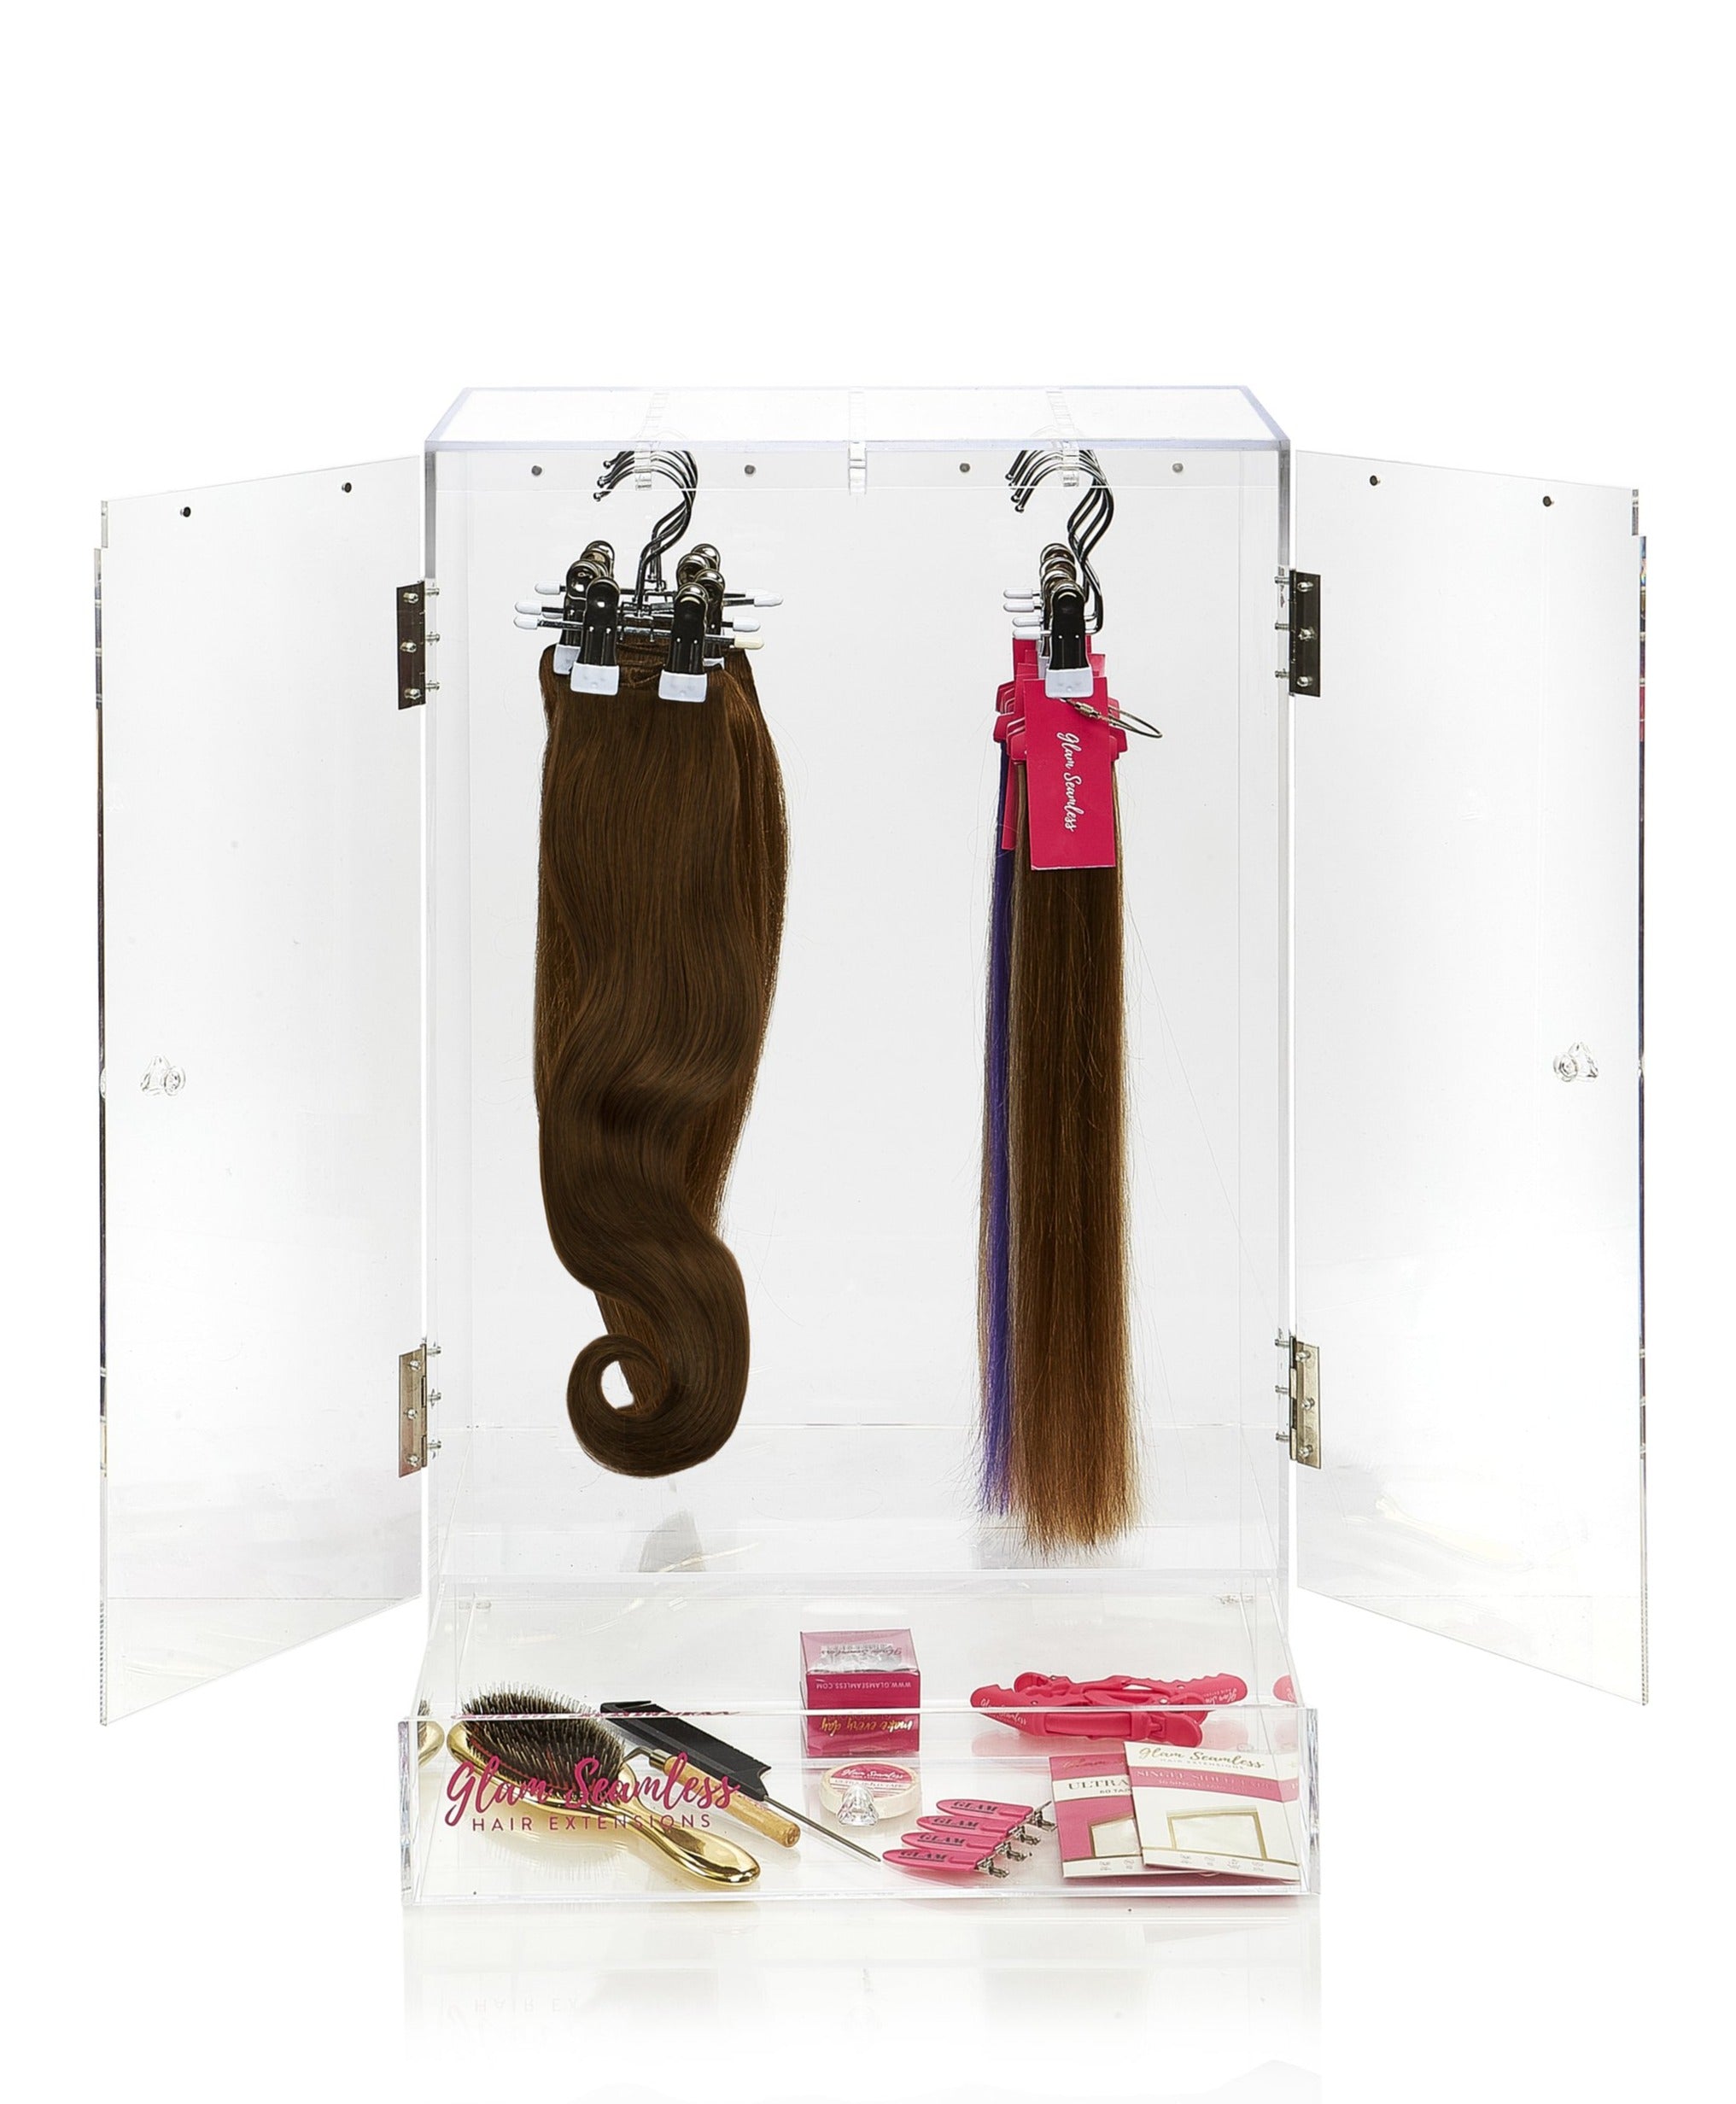 Glam Seamless Professional Hair Extension Organizer & Storage Unit - Glam  Seamless Hair Extensions